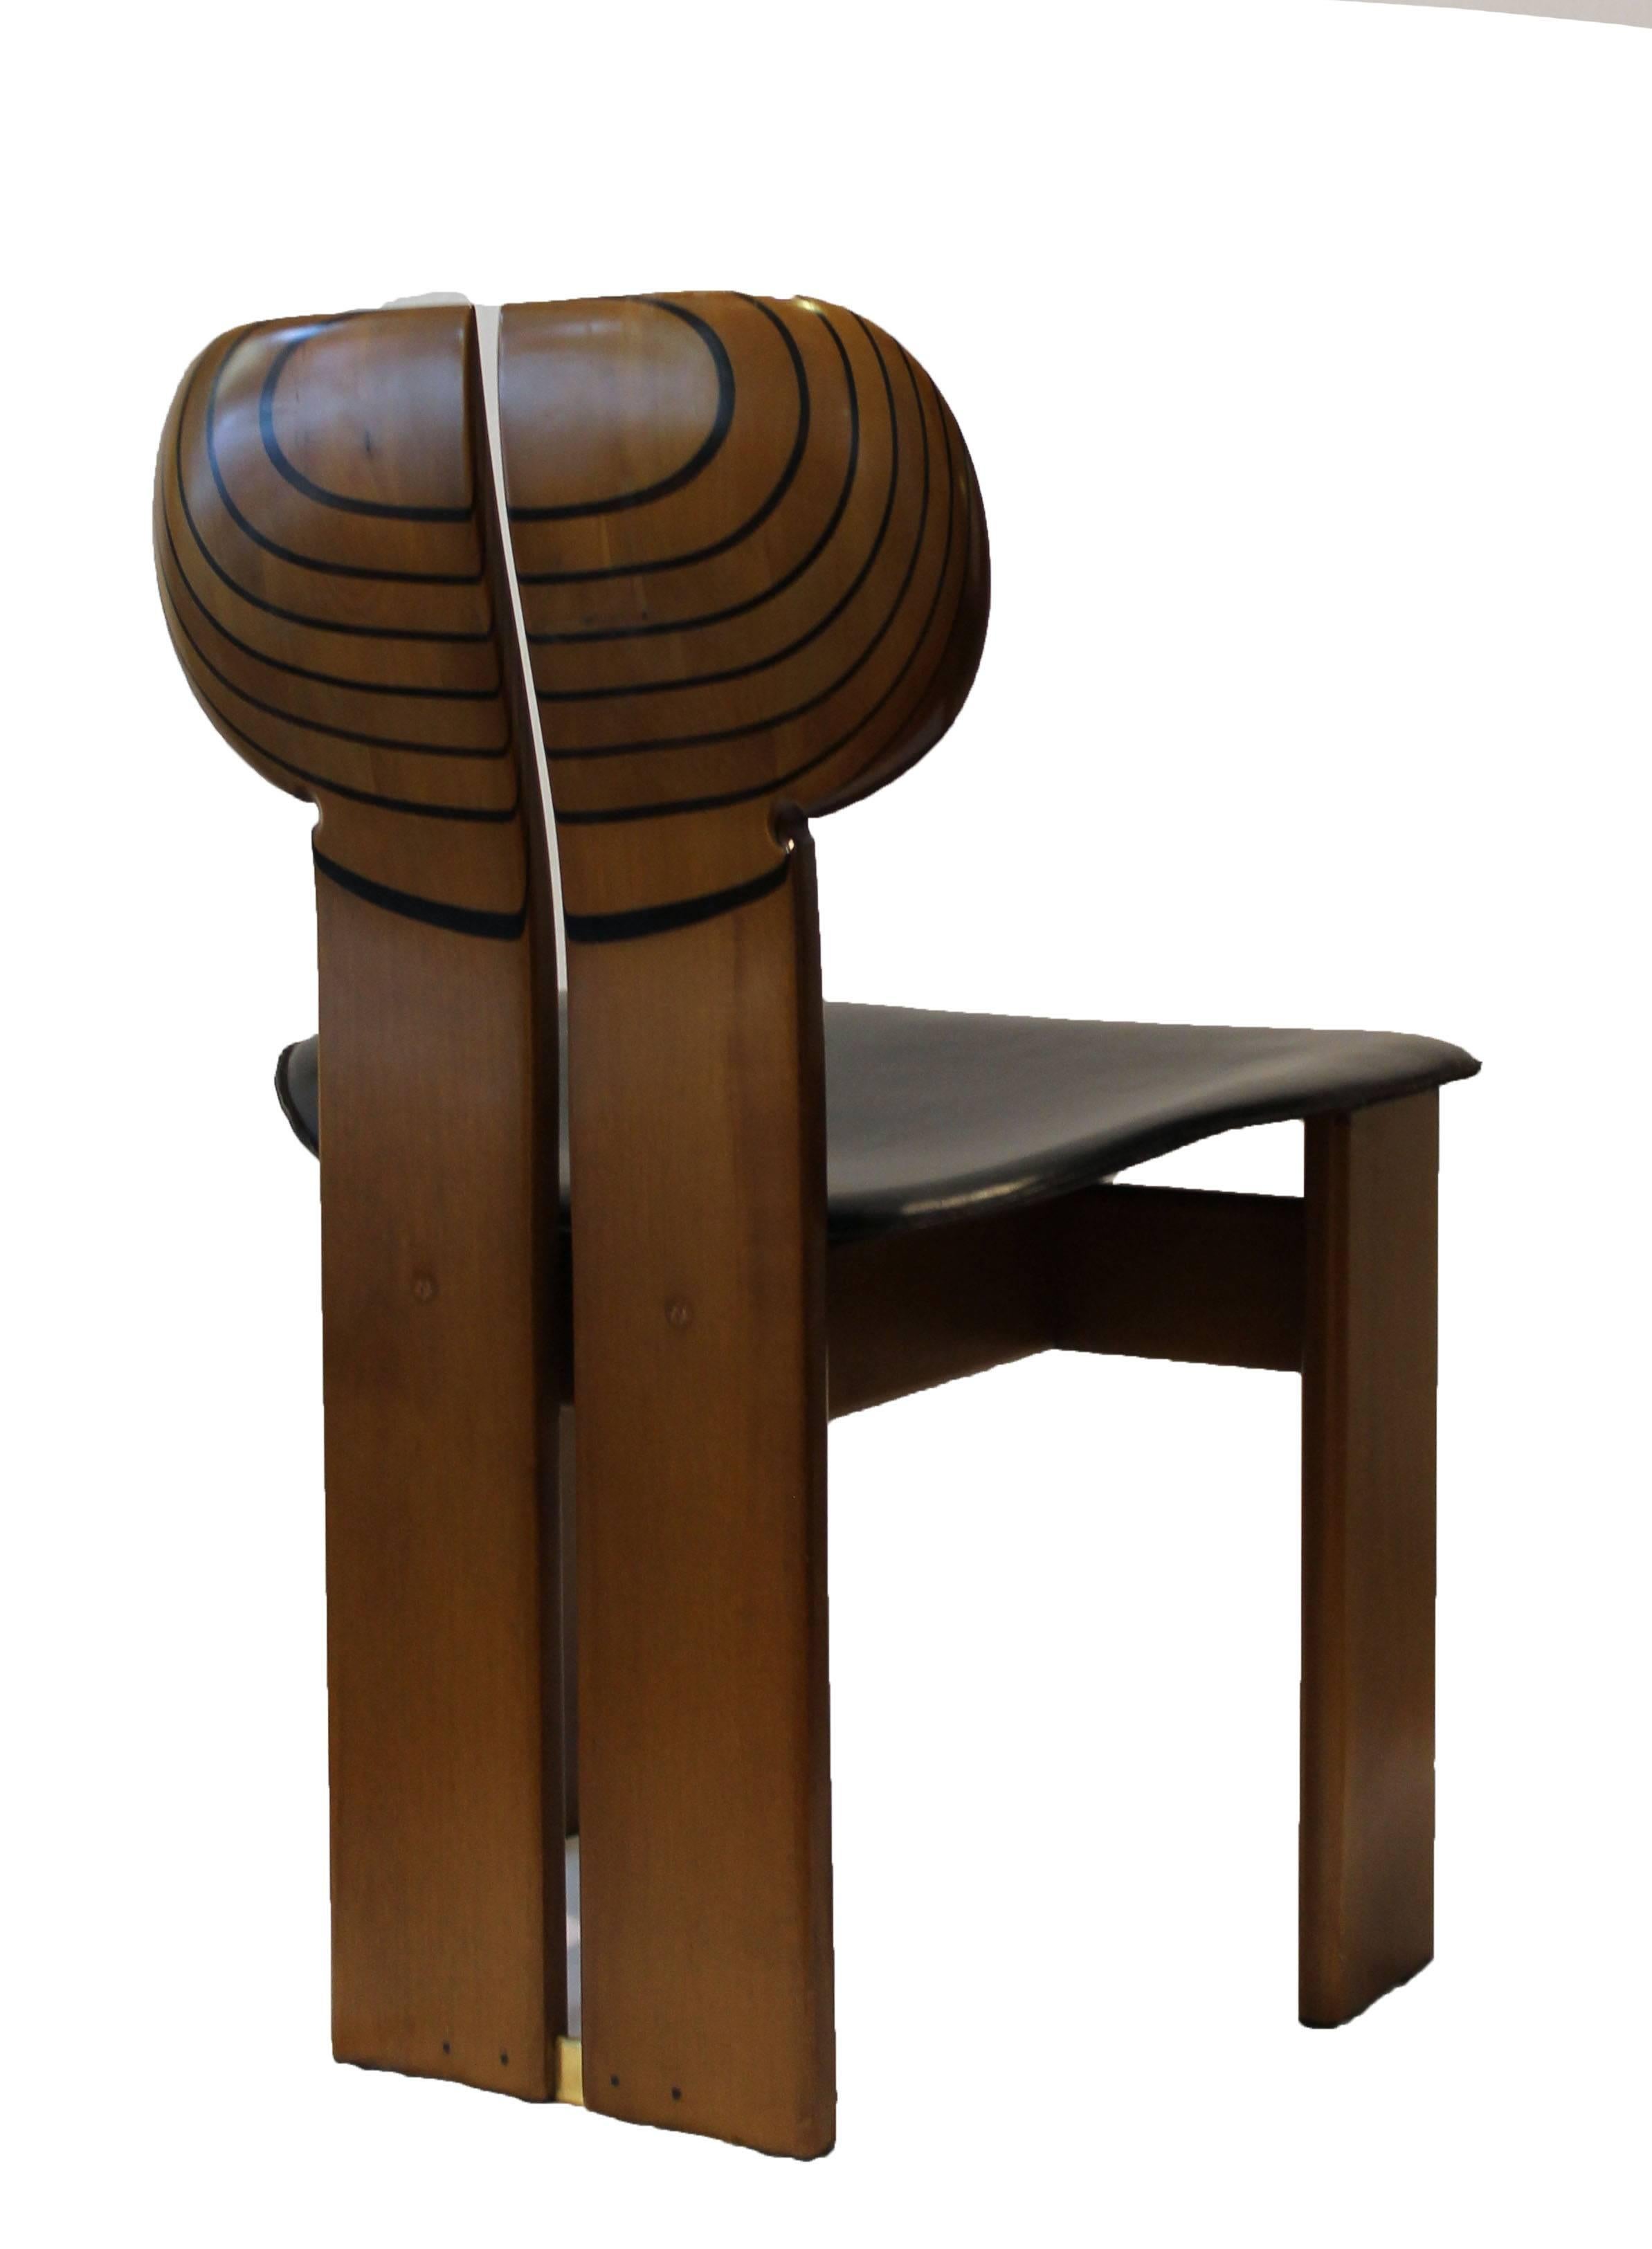 Five Africa chairs, from Artona series, designed by Afra e Tobia Scarpa for Maxalto (B&B Italia). Walnut and ebony wood, leather covered seat and brass details. Africa table available on request.

The Africa chair from the Artona series was